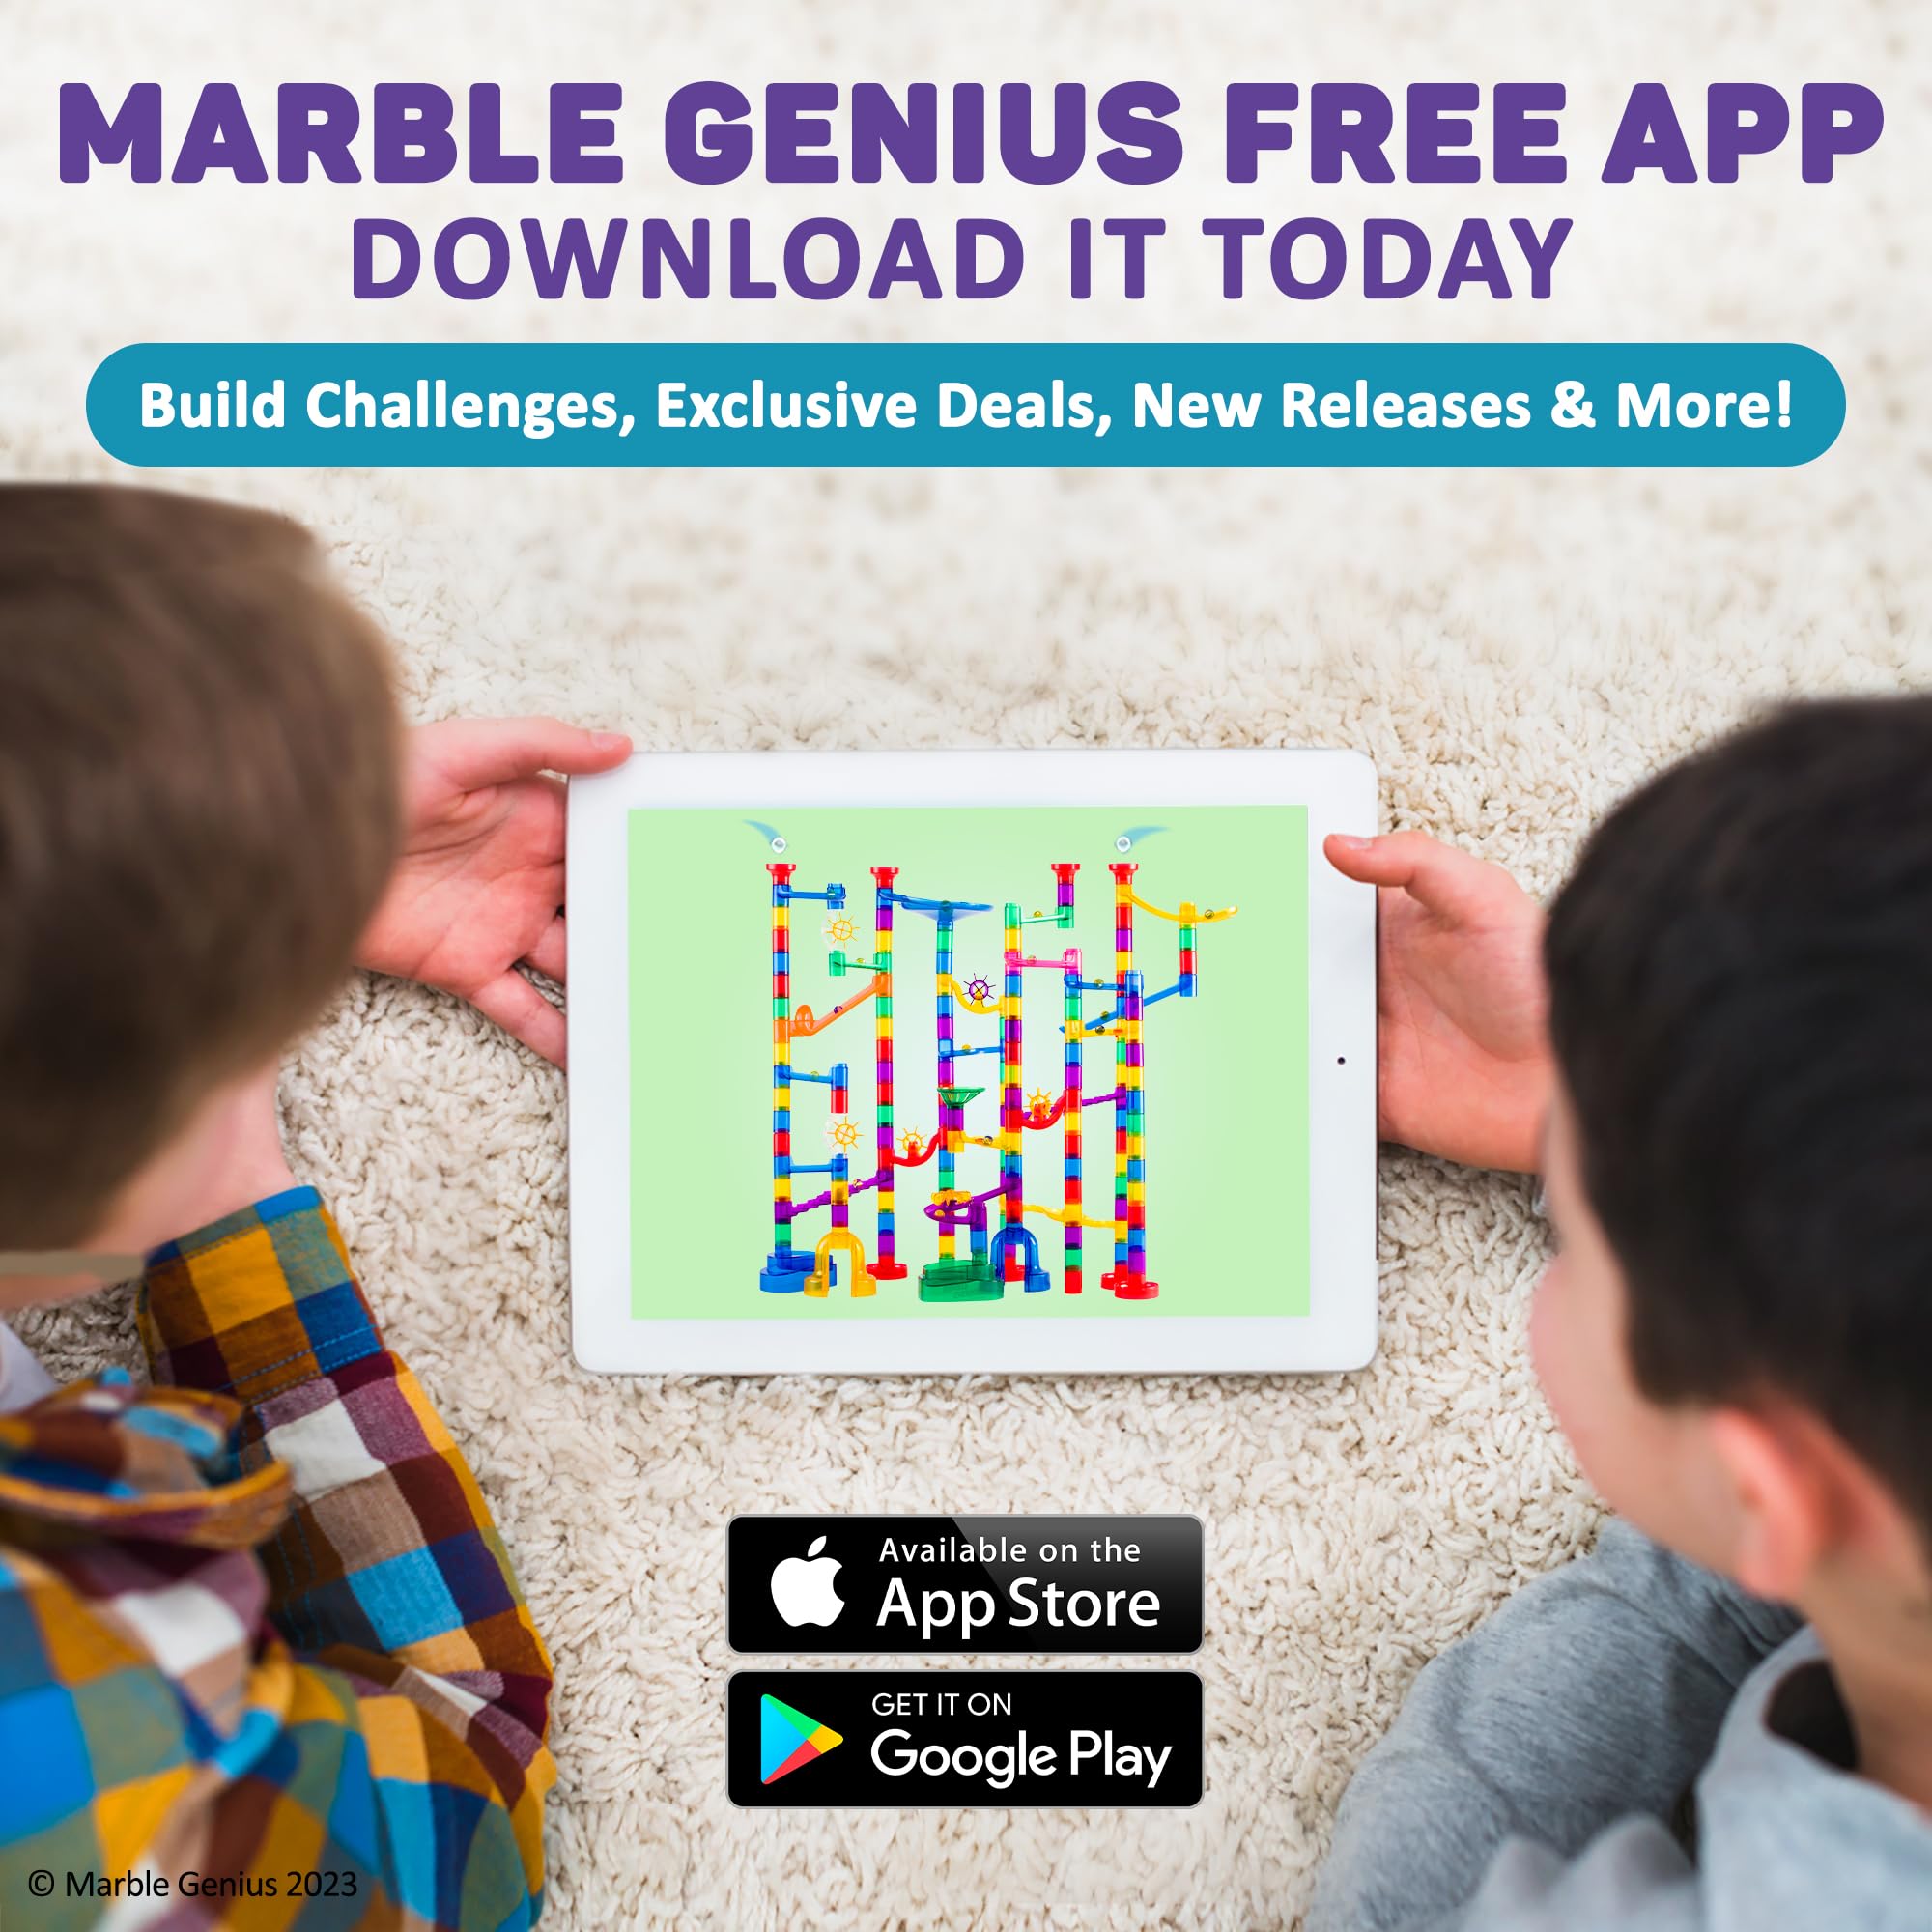 Marble Genius Bundle: Marble Run Booster Set (20 Pieces), Pipes, Spheres & Tubes Accessory, Automatic Chain Lift, Create Exciting Mazes, Tracks, and Races